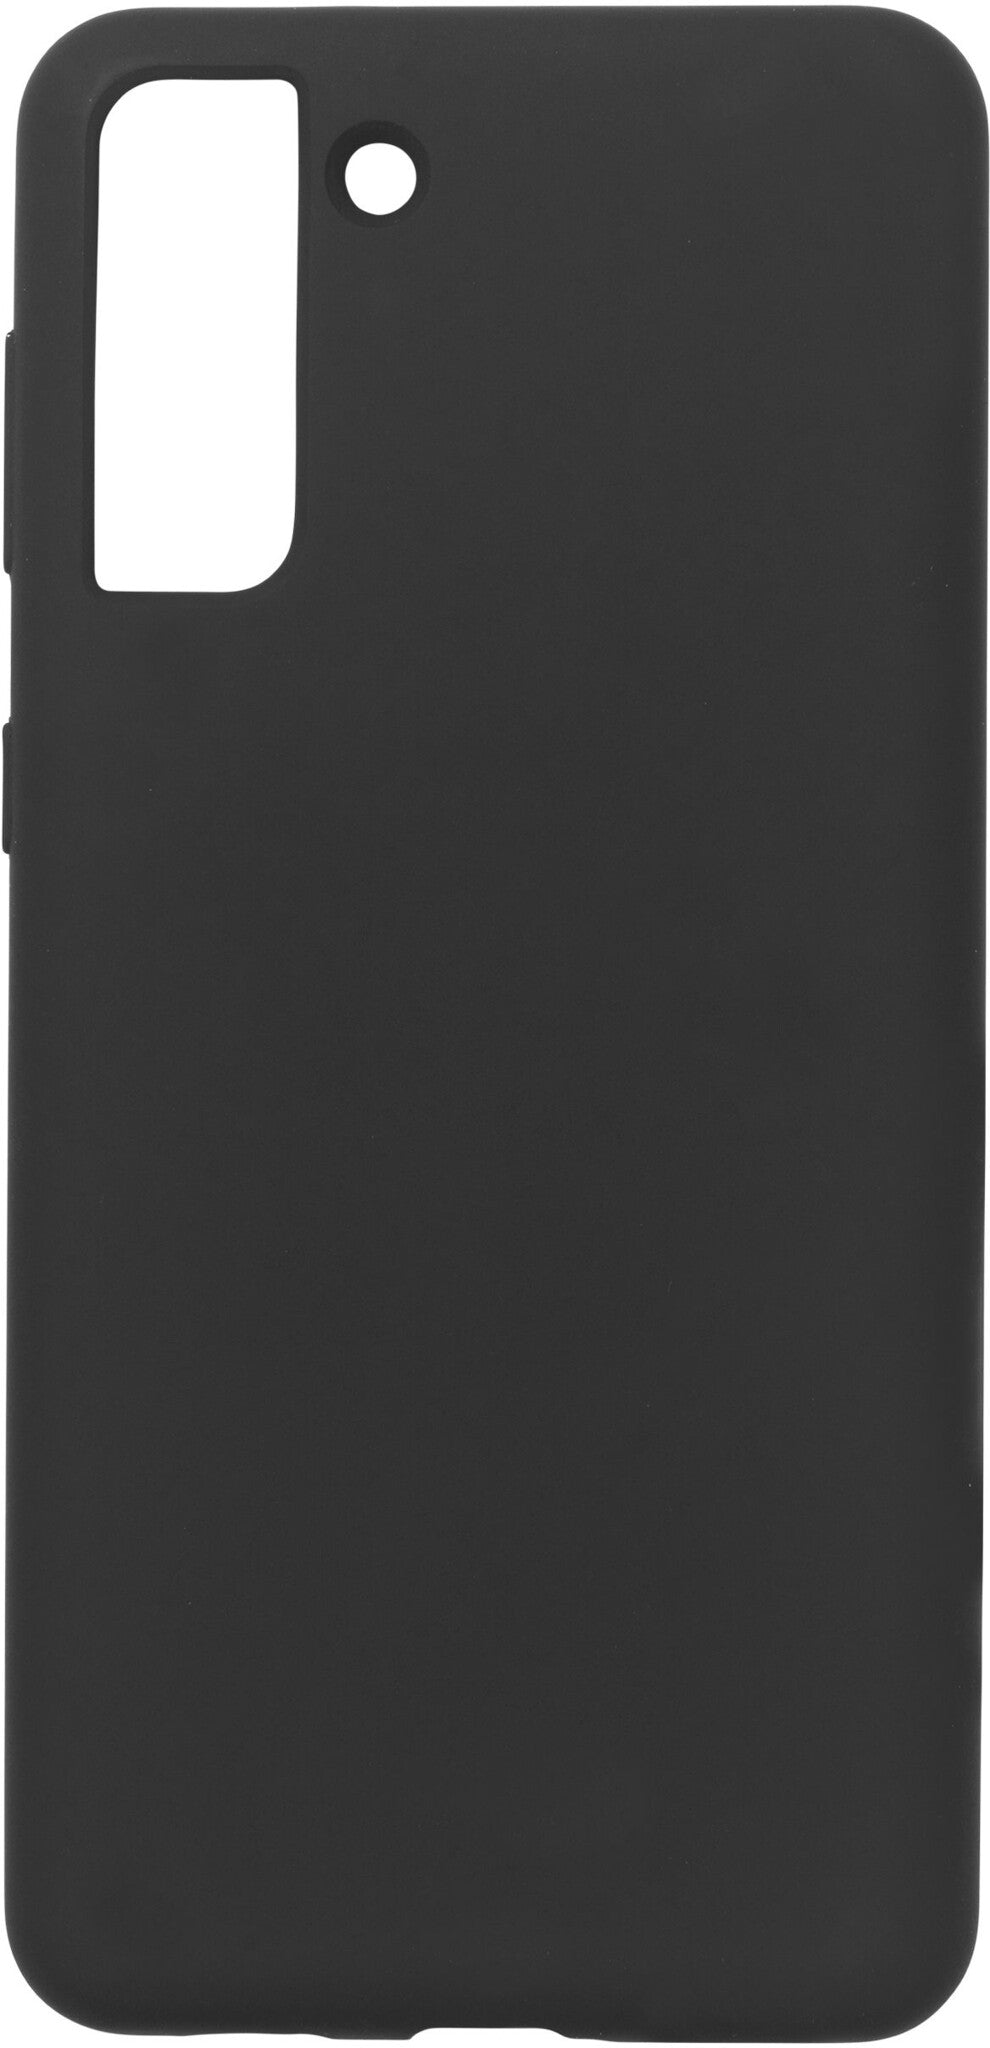 eSTUFF MADRID mobile phone case for Galaxy S21+ (5G) in Black